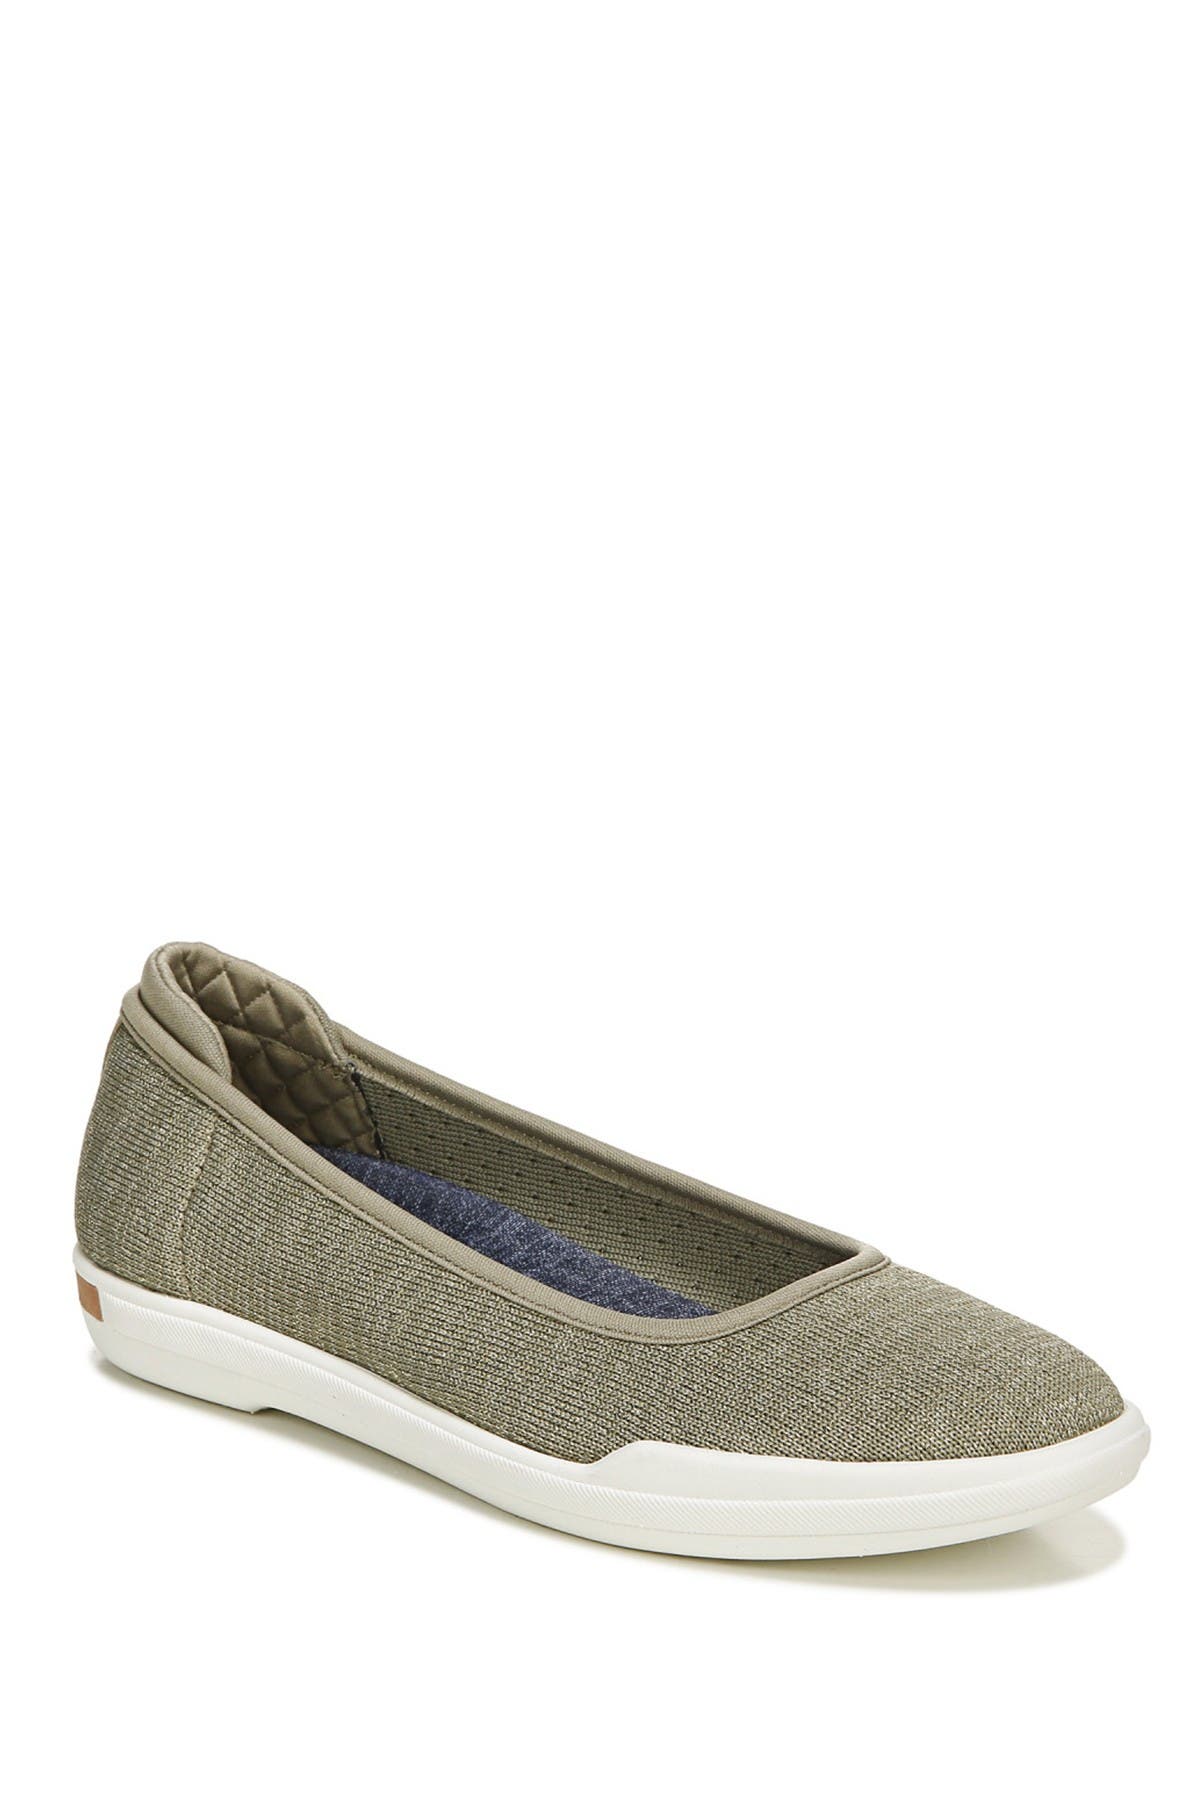 Dr. Scholl's Rise Knit Slip-on Flat In Sage Green